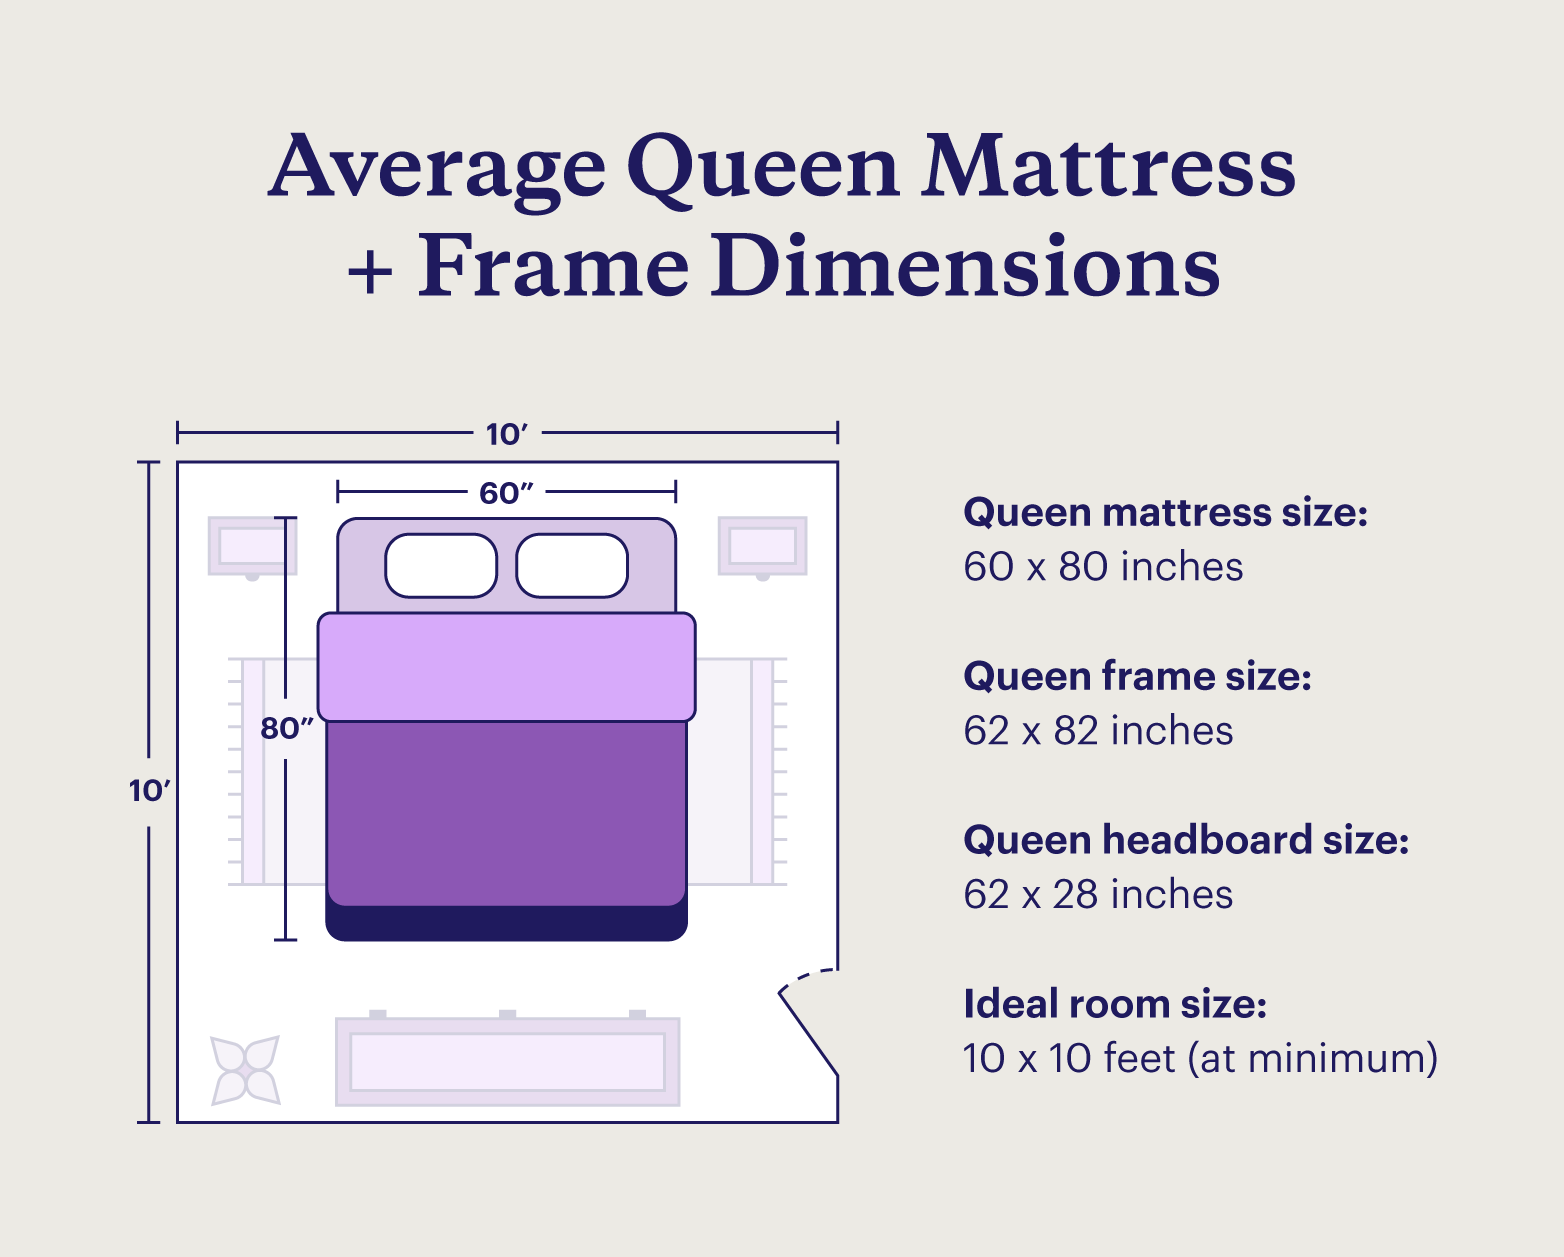 Illustration of a mattress in a bedroom showing how wide a queen bed is compared to queen bed frame dimensions and room size.